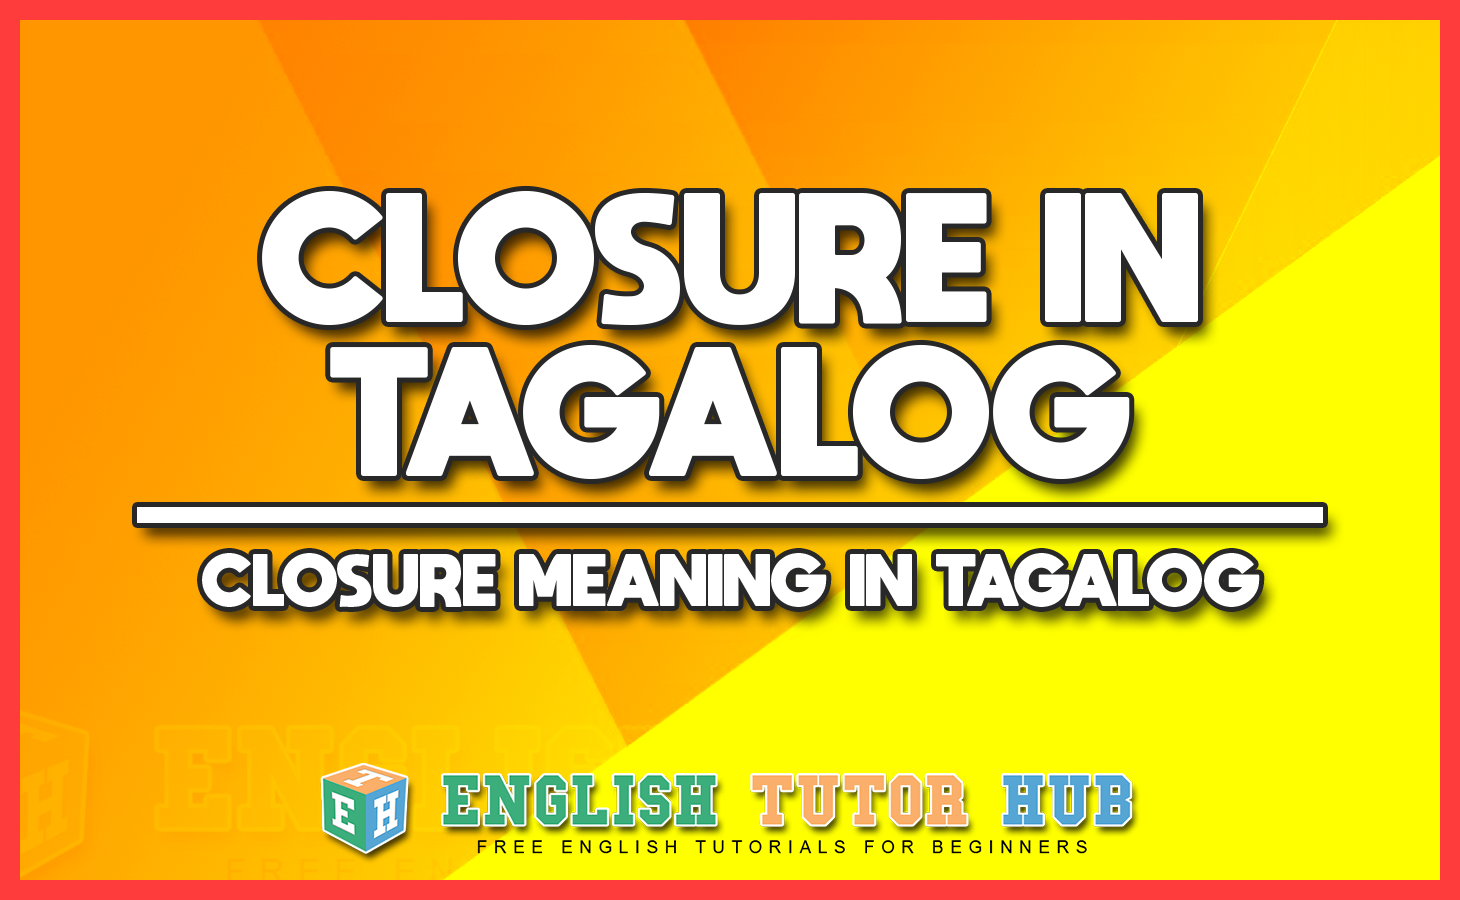 CLOSURE IN TAGALOG - CLOSURE MEANING IN TAGALOG